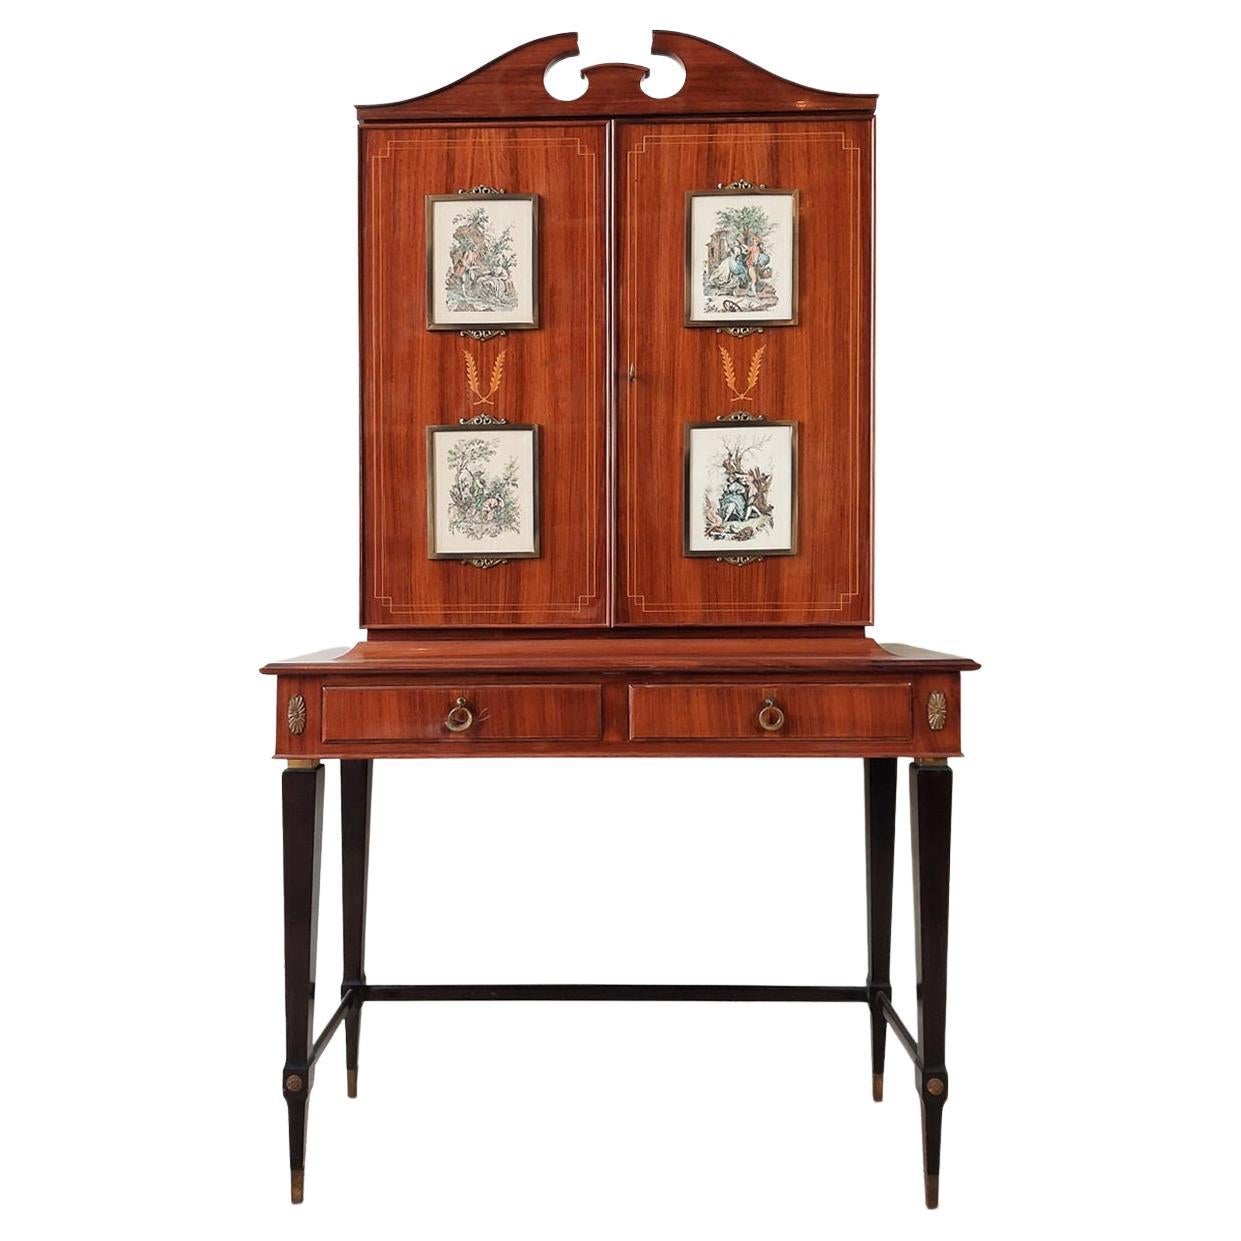 1960s Italian Designer Drinks Cabinet, Inlaid and Decorated with Etchings For Sale